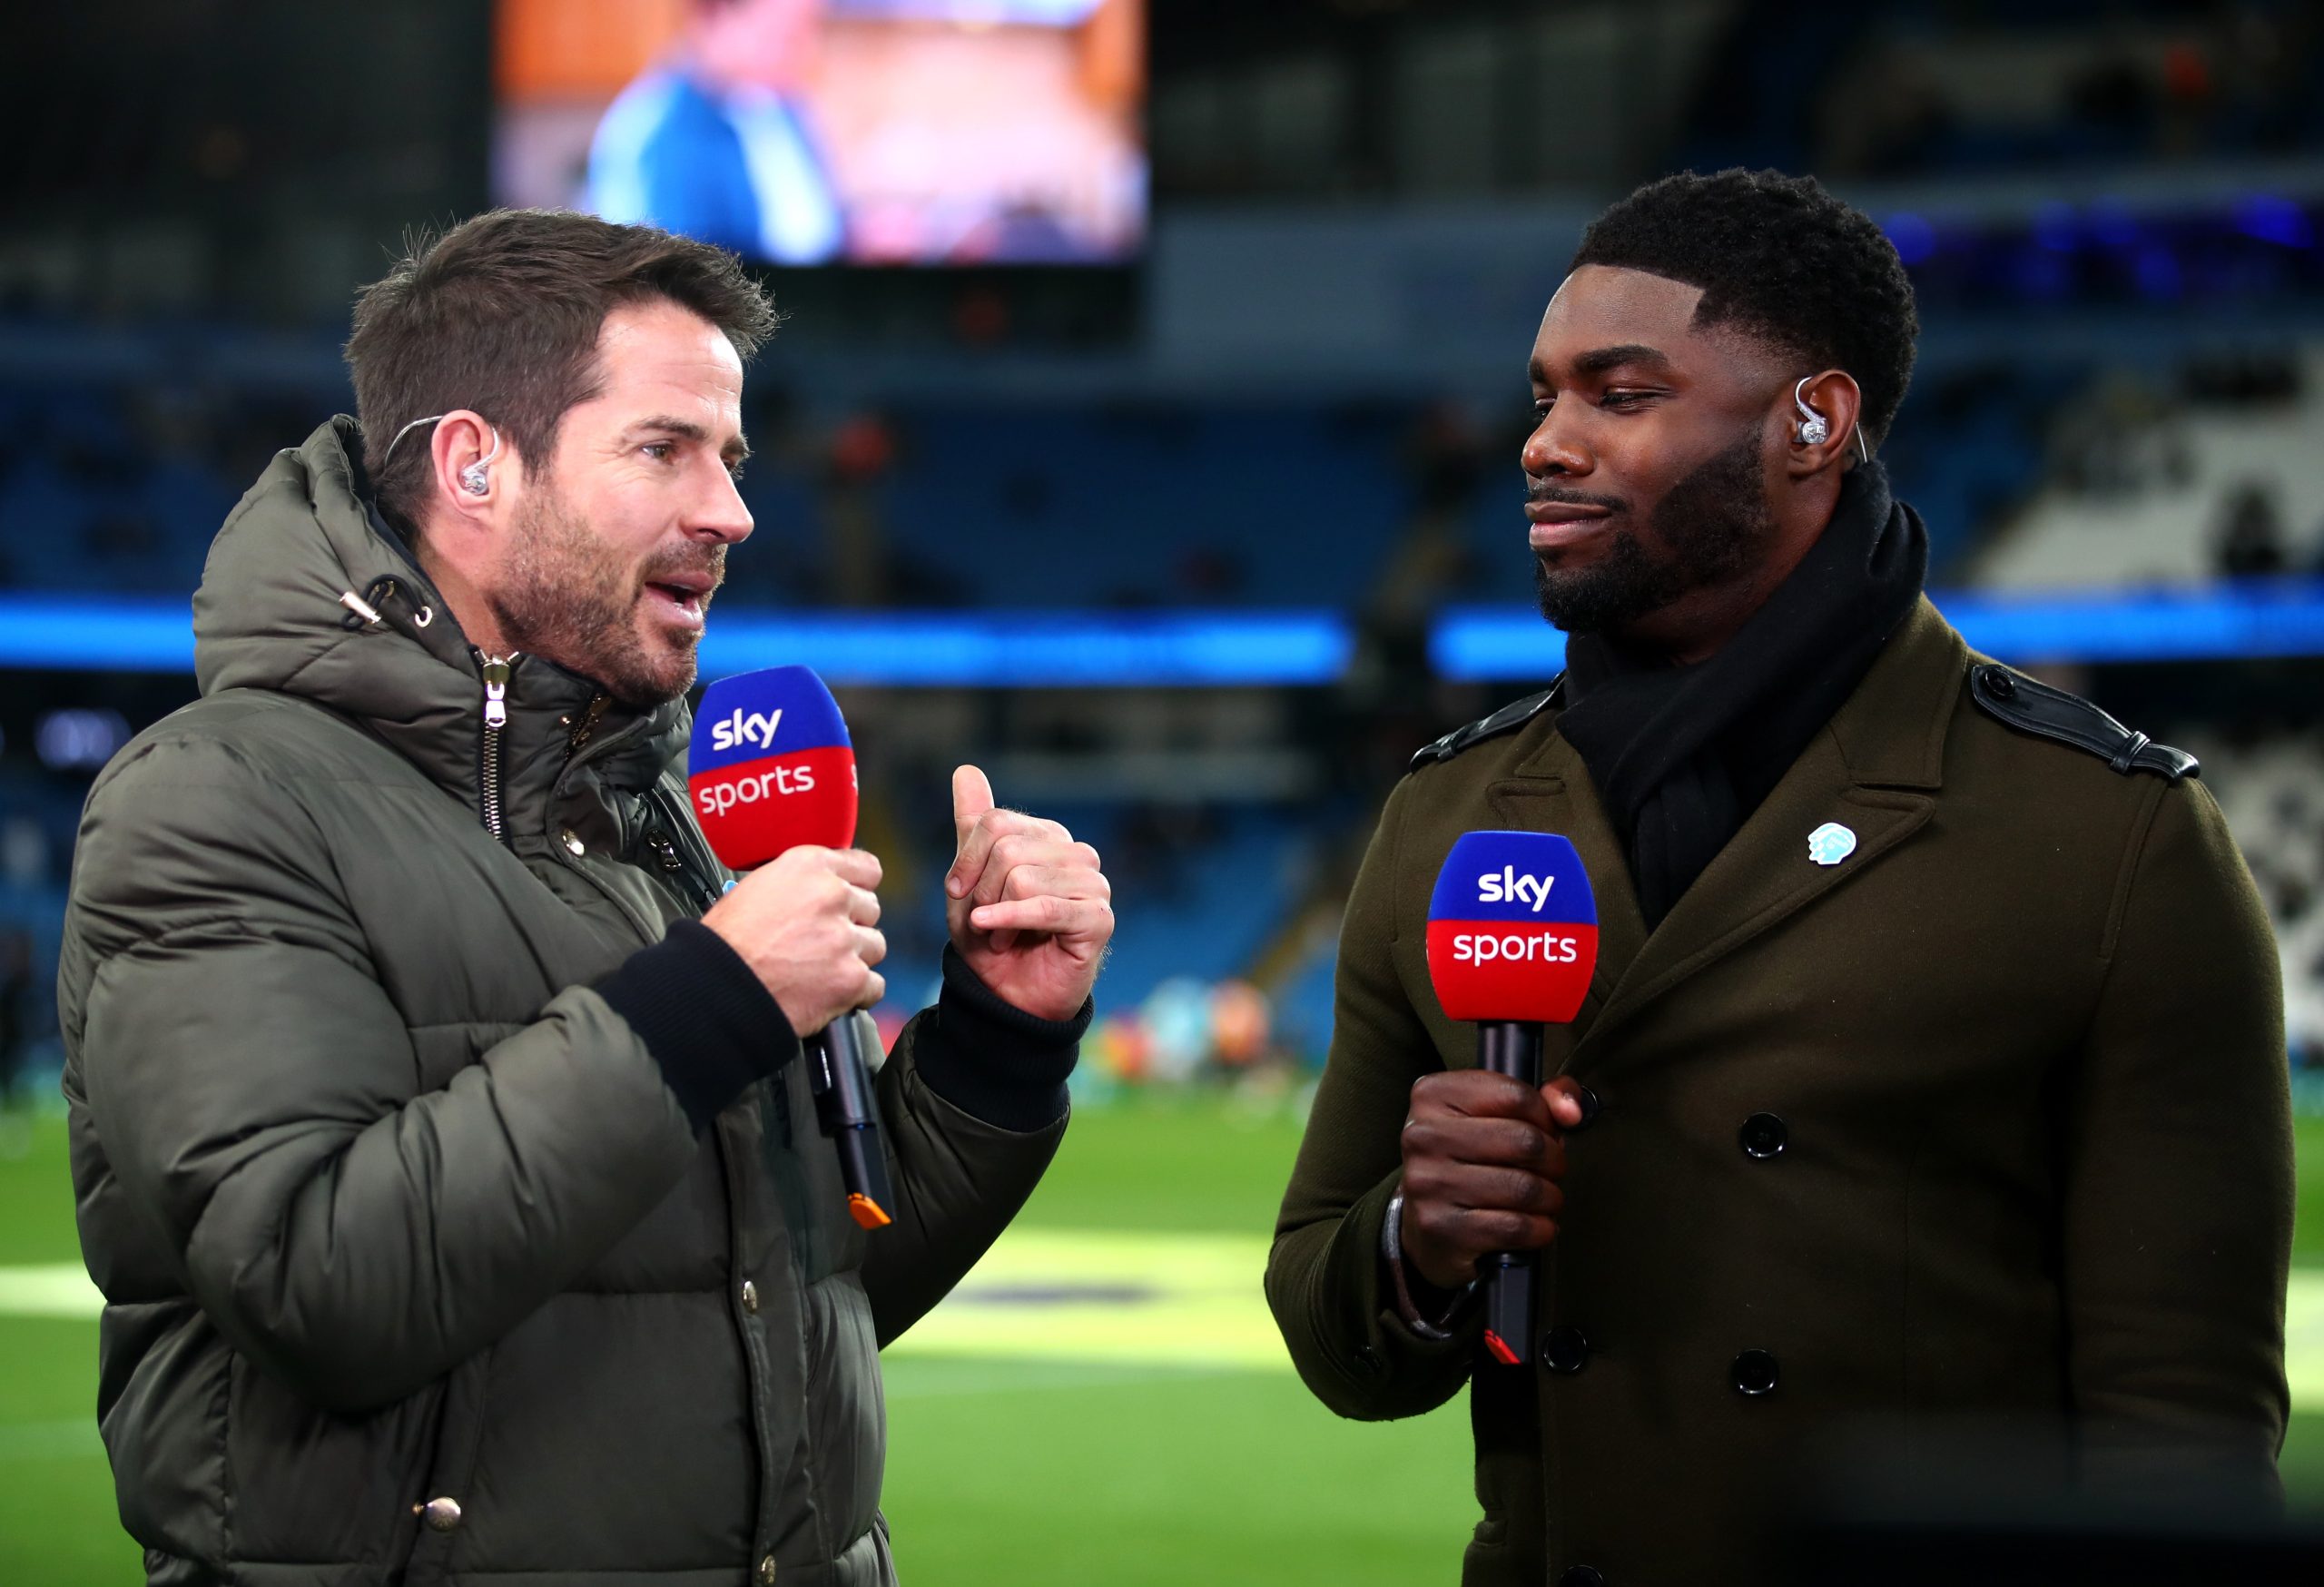 Former Manchester City player who supports Arsenal gives his predictions on Tottenham facing the Cityzens